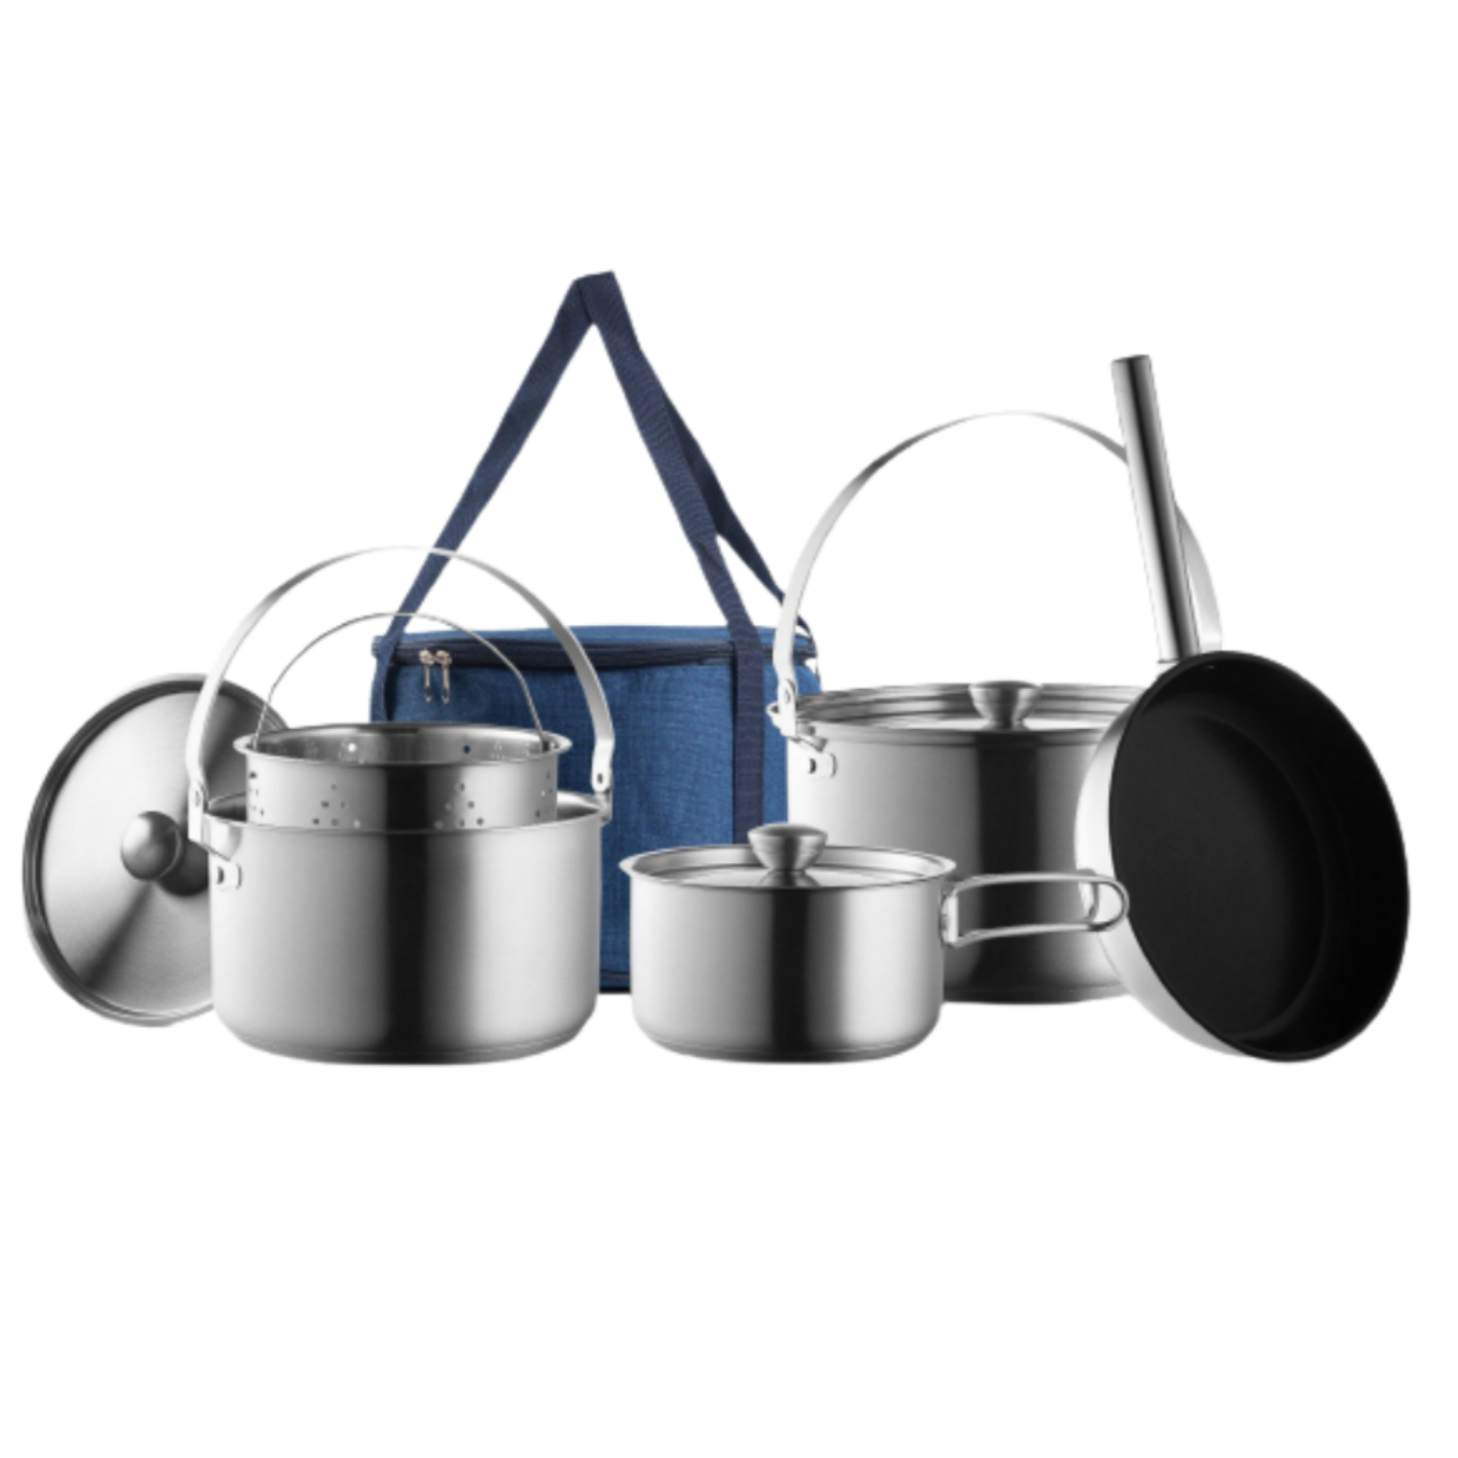 CretFine 304 Stainless Steel Camping Cookware Set with Portable Bag 